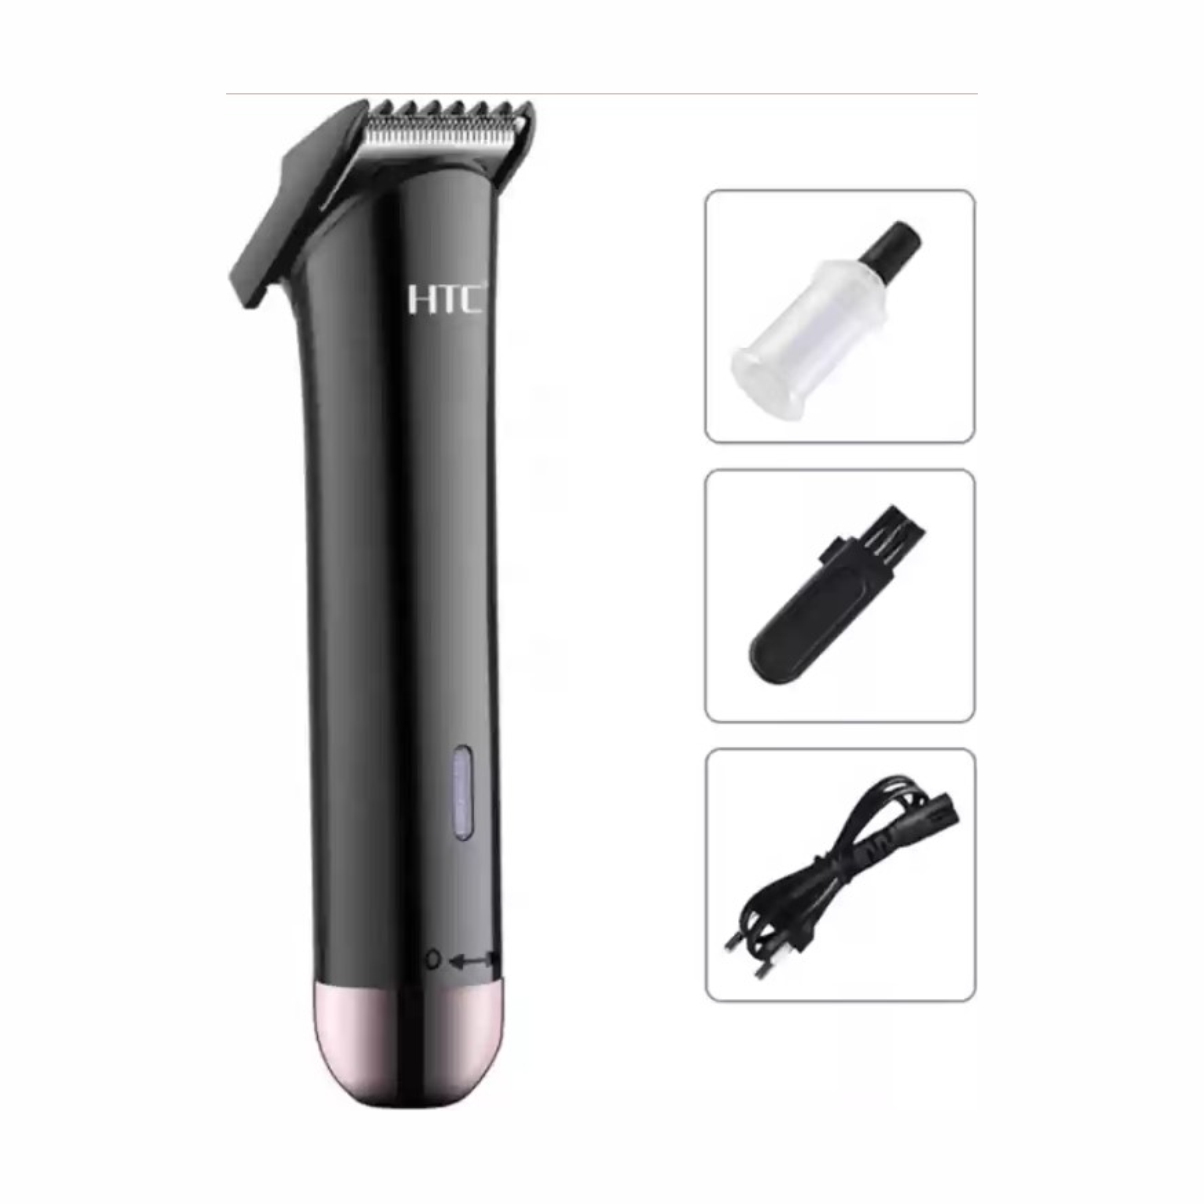 HTC AT - 503 Trimmer 45 min Runtime 4 Length Settings 